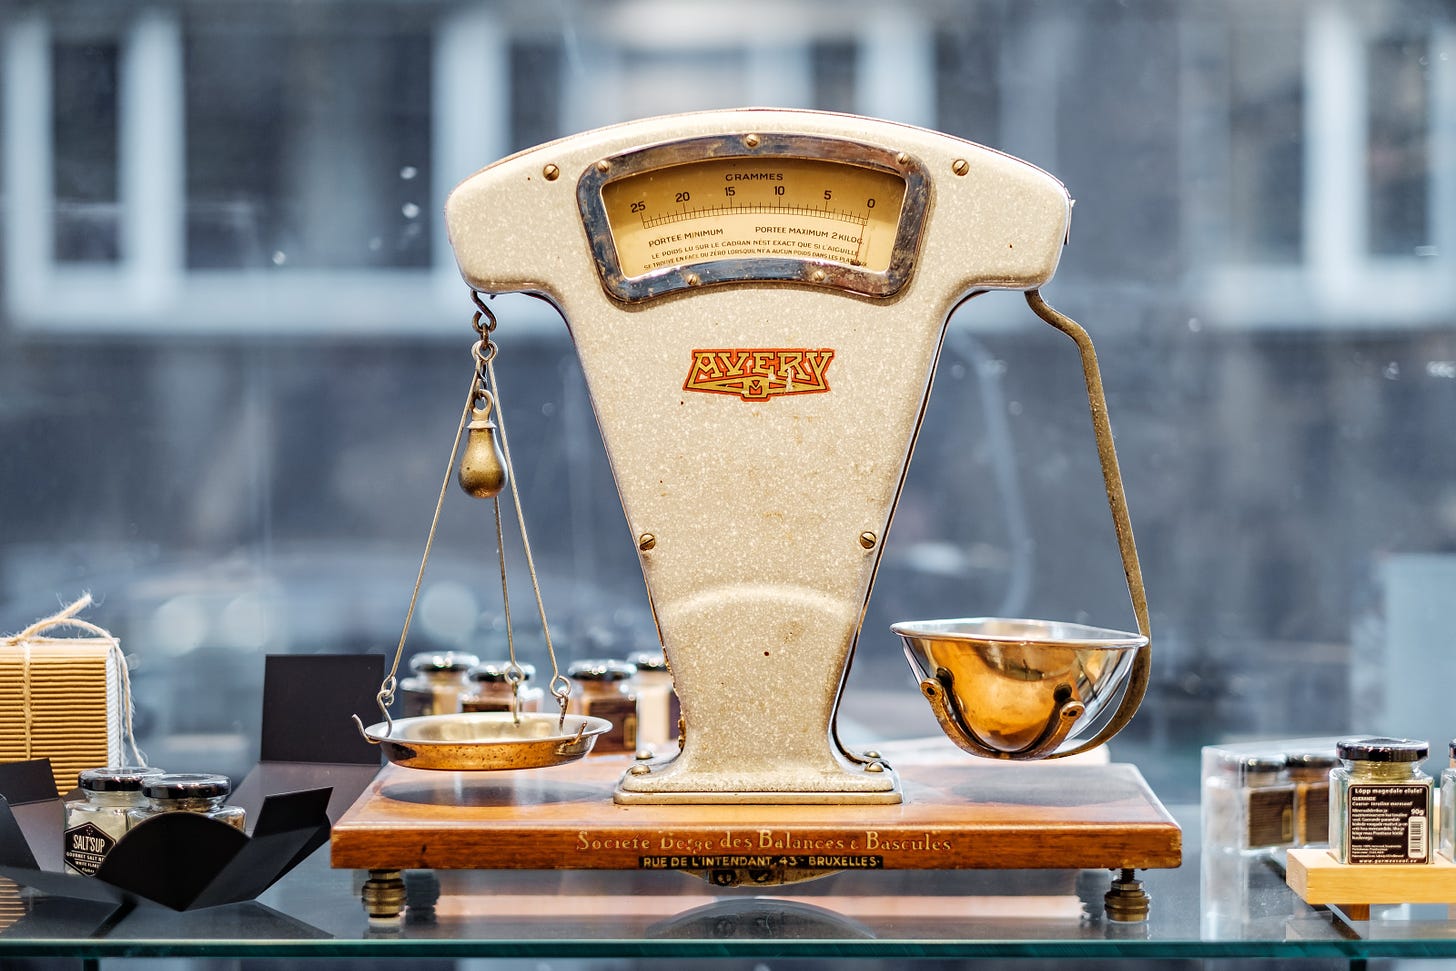 Photograph of an antique scale